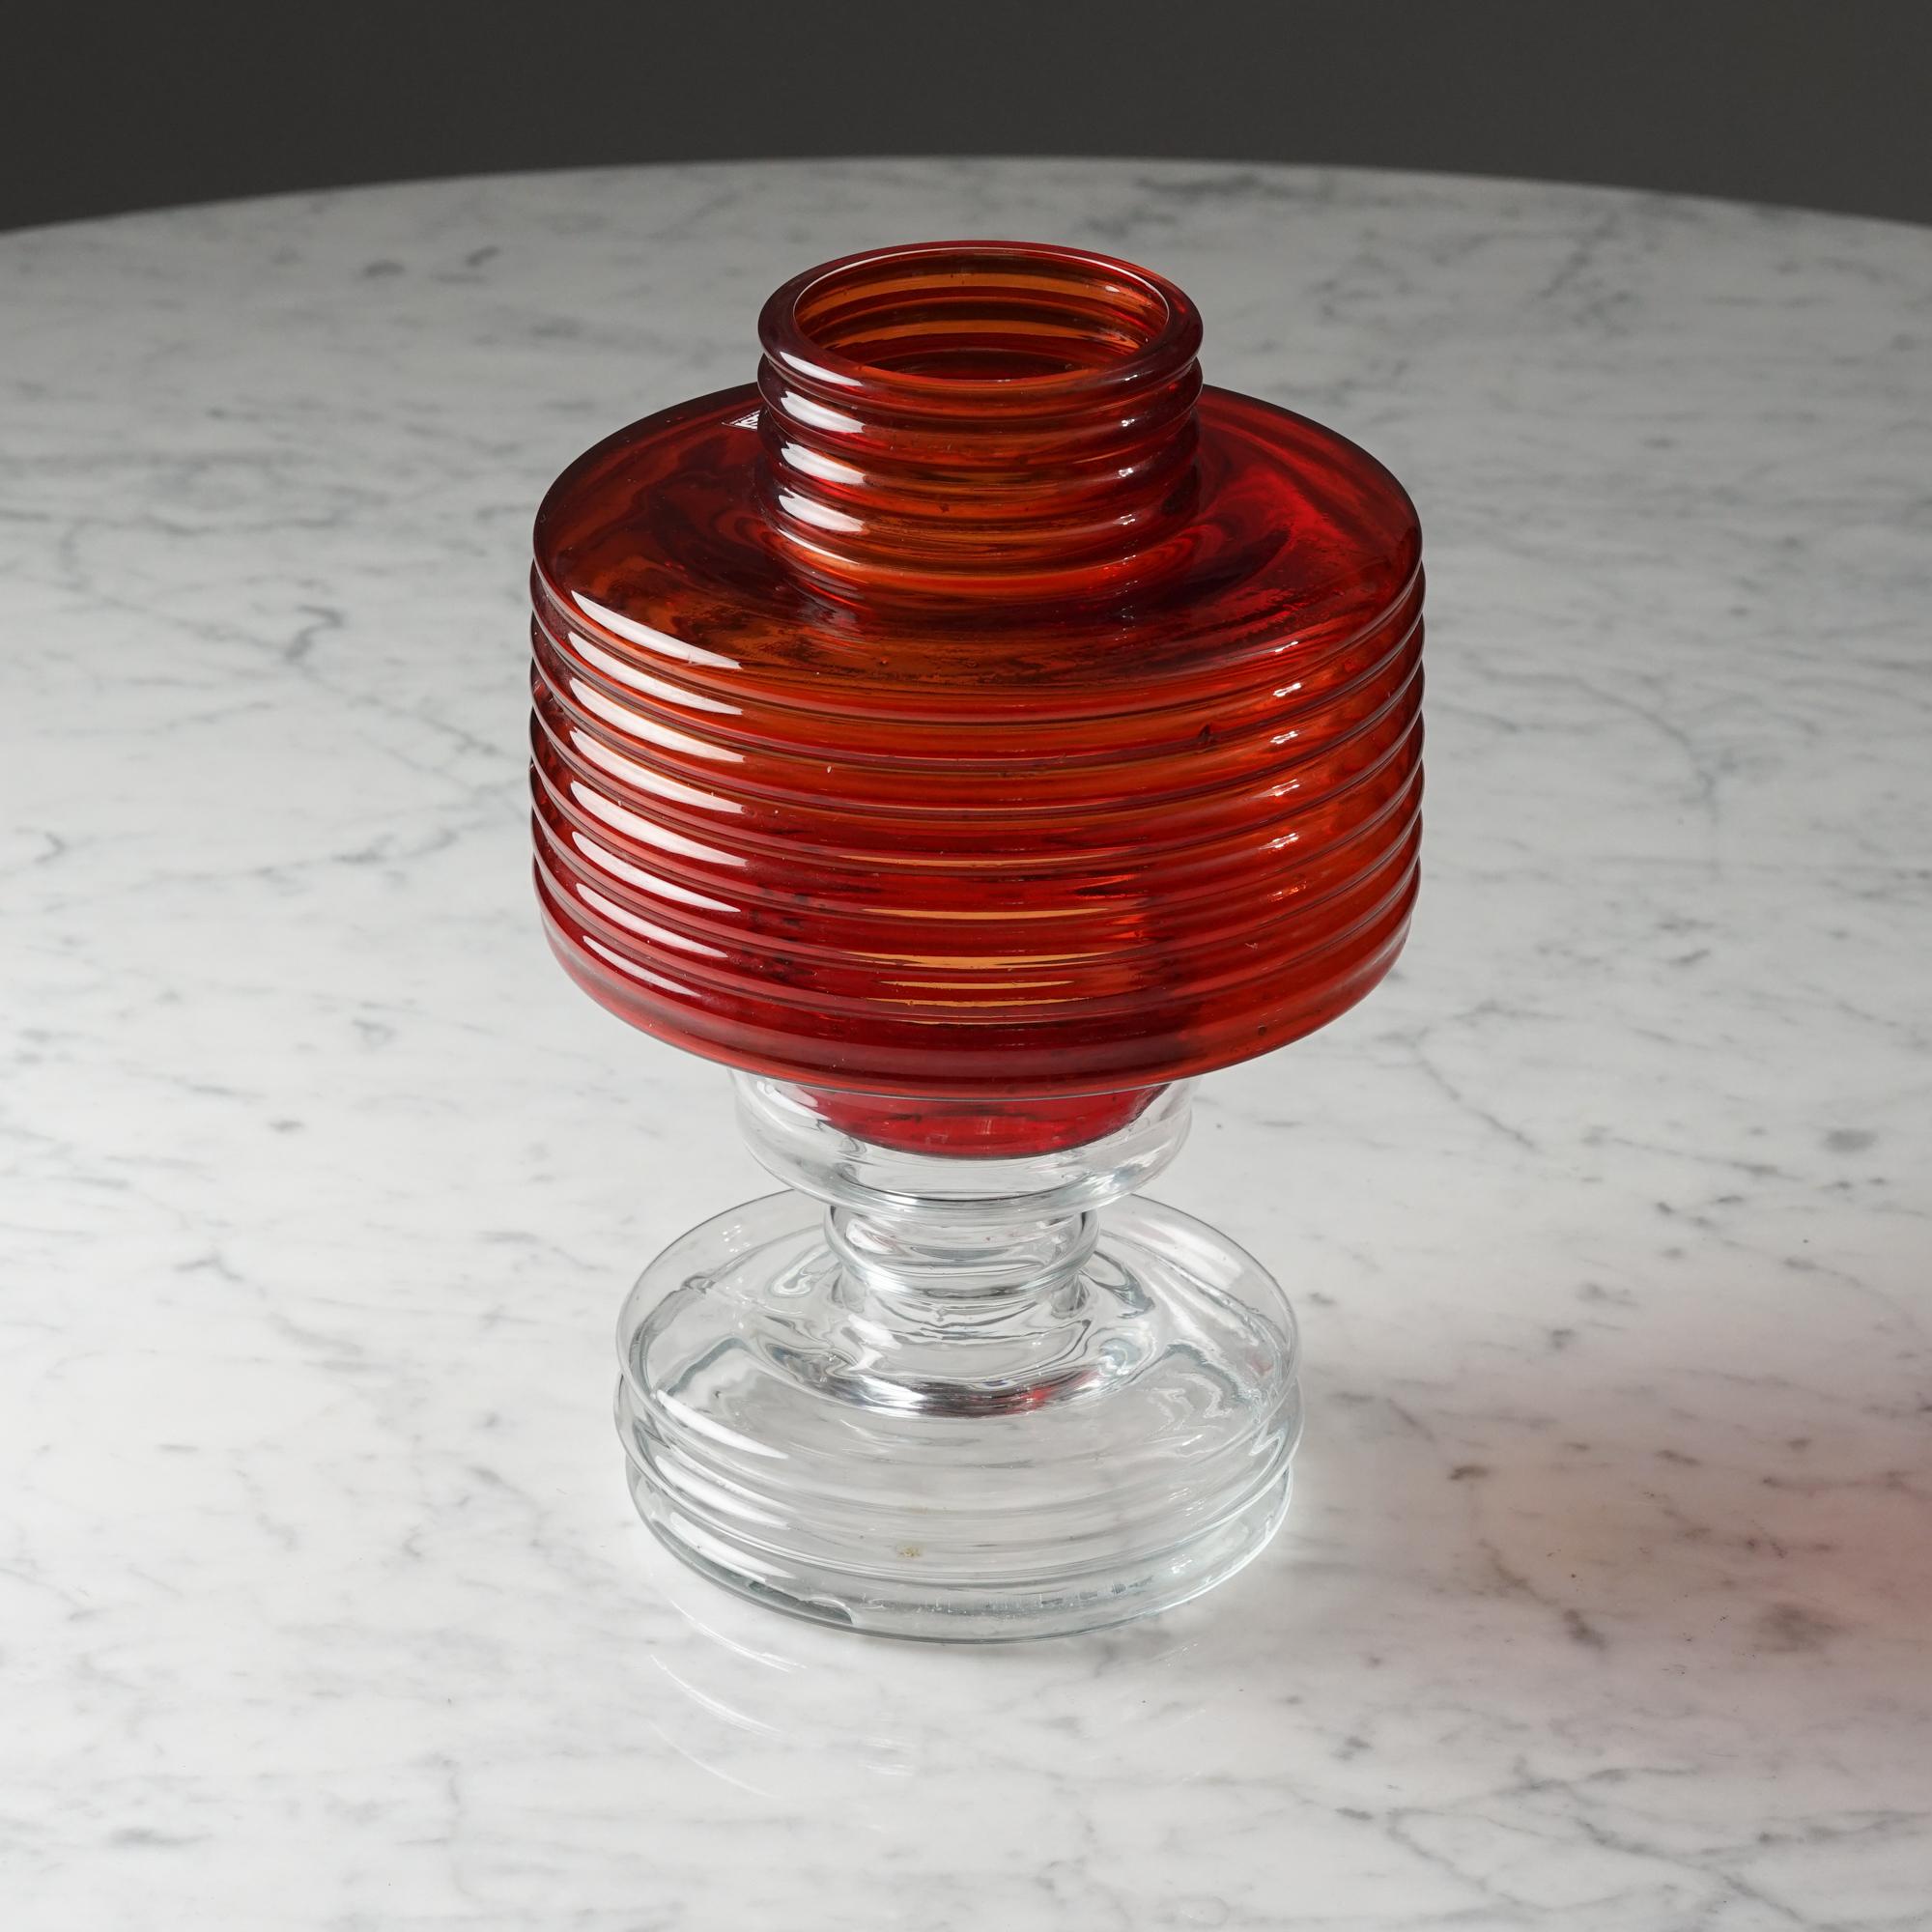 Candleholder 'Apollo' by Nanny Still for Riihimäen lasi, 1970s. Riihimäen lasi -mark on the top of the candleholder. Classic 70s style. Beautiful candle fixture to light up the cozy autumn evenings. 

Measurements: bottom diameter 13.5 cm, diameter